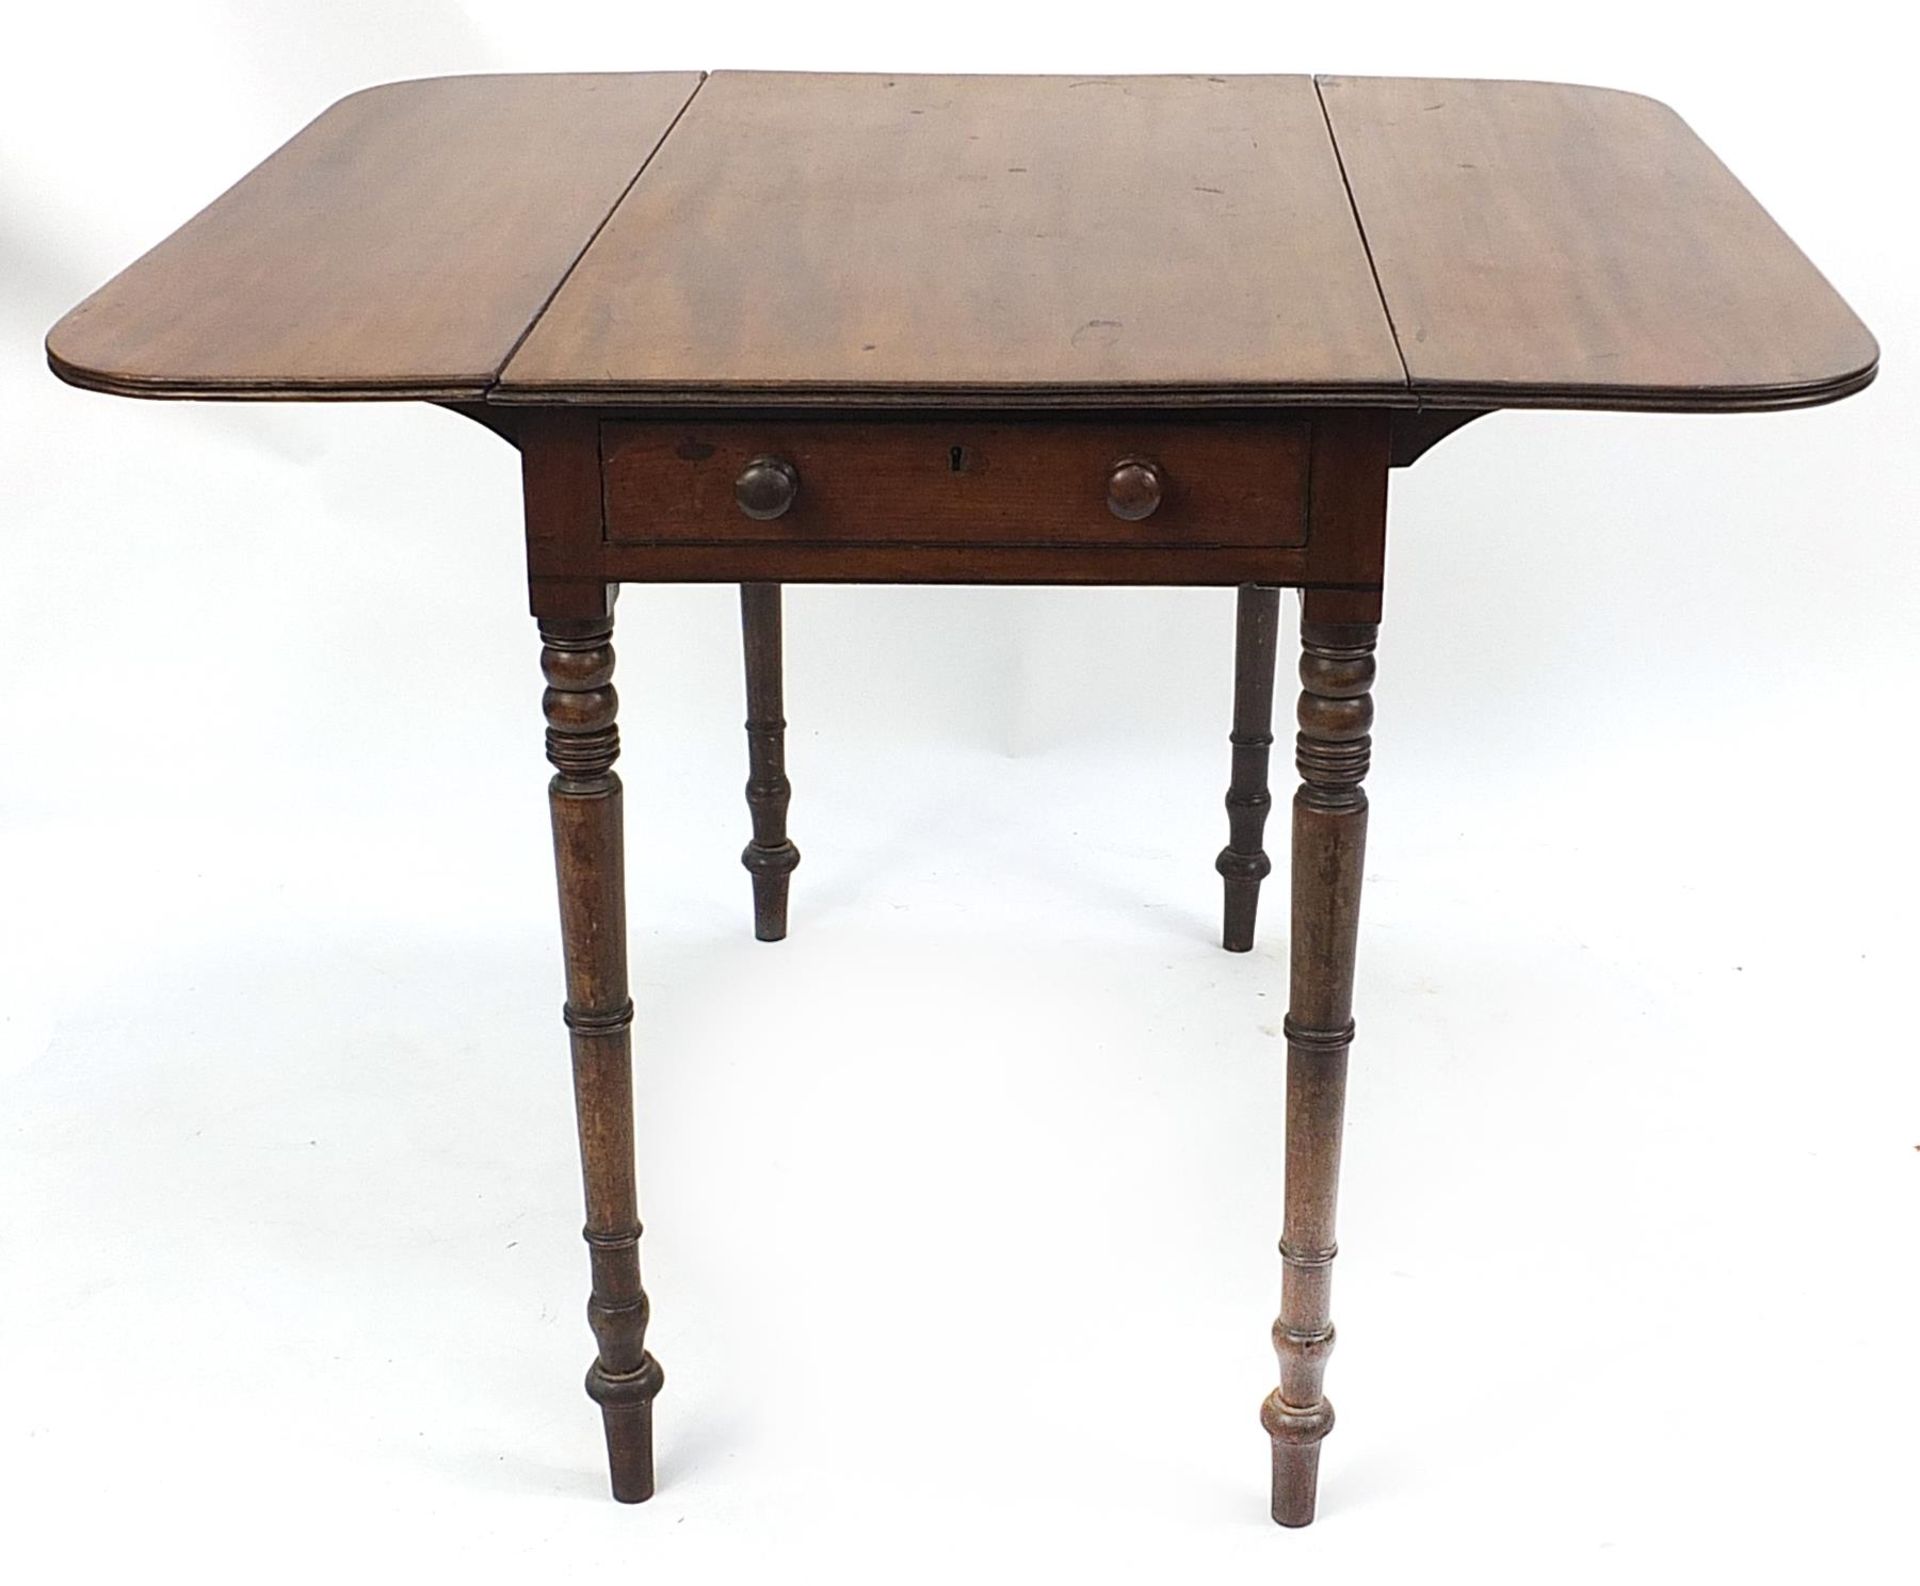 Victorian mahogany Pembroke table with drawer to the end, 72cm H x 89cm W x 49cm D